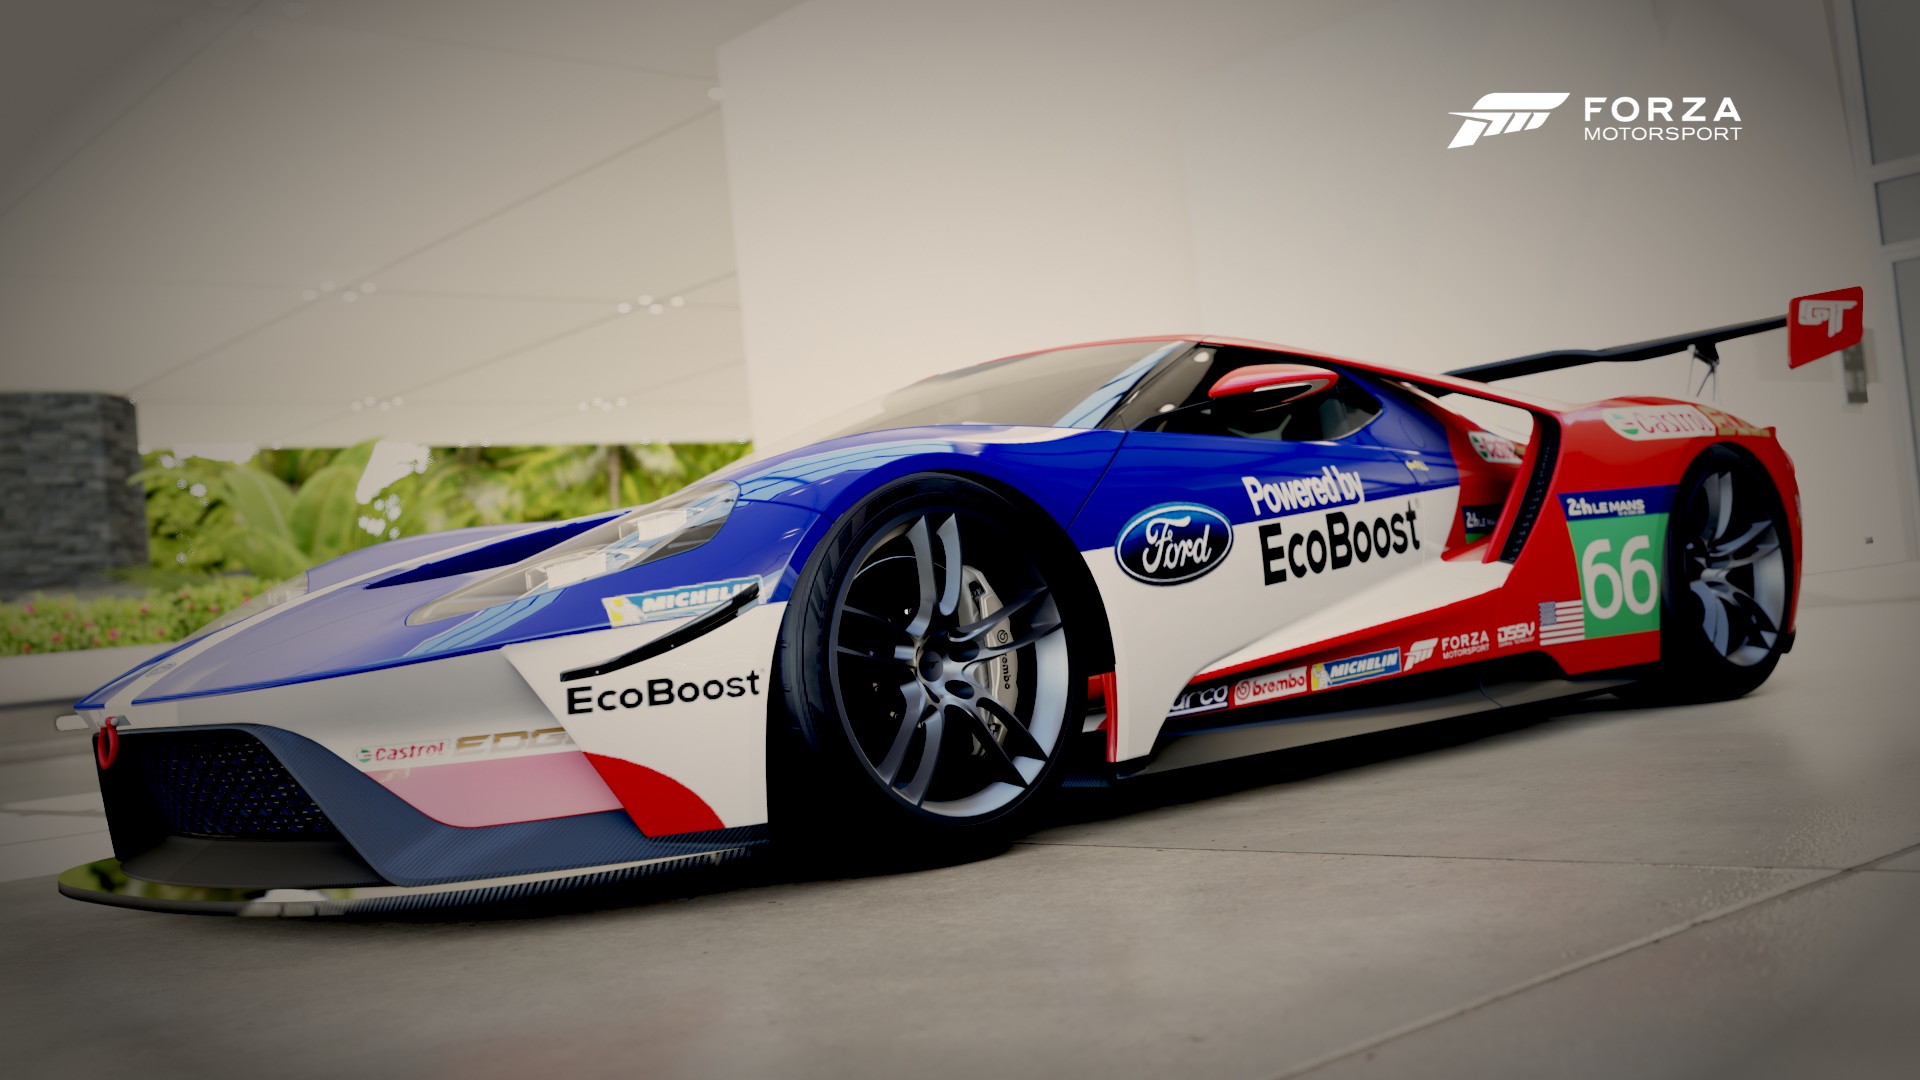 Ford Ford Gt Forza Motorsport 6 1920x1080